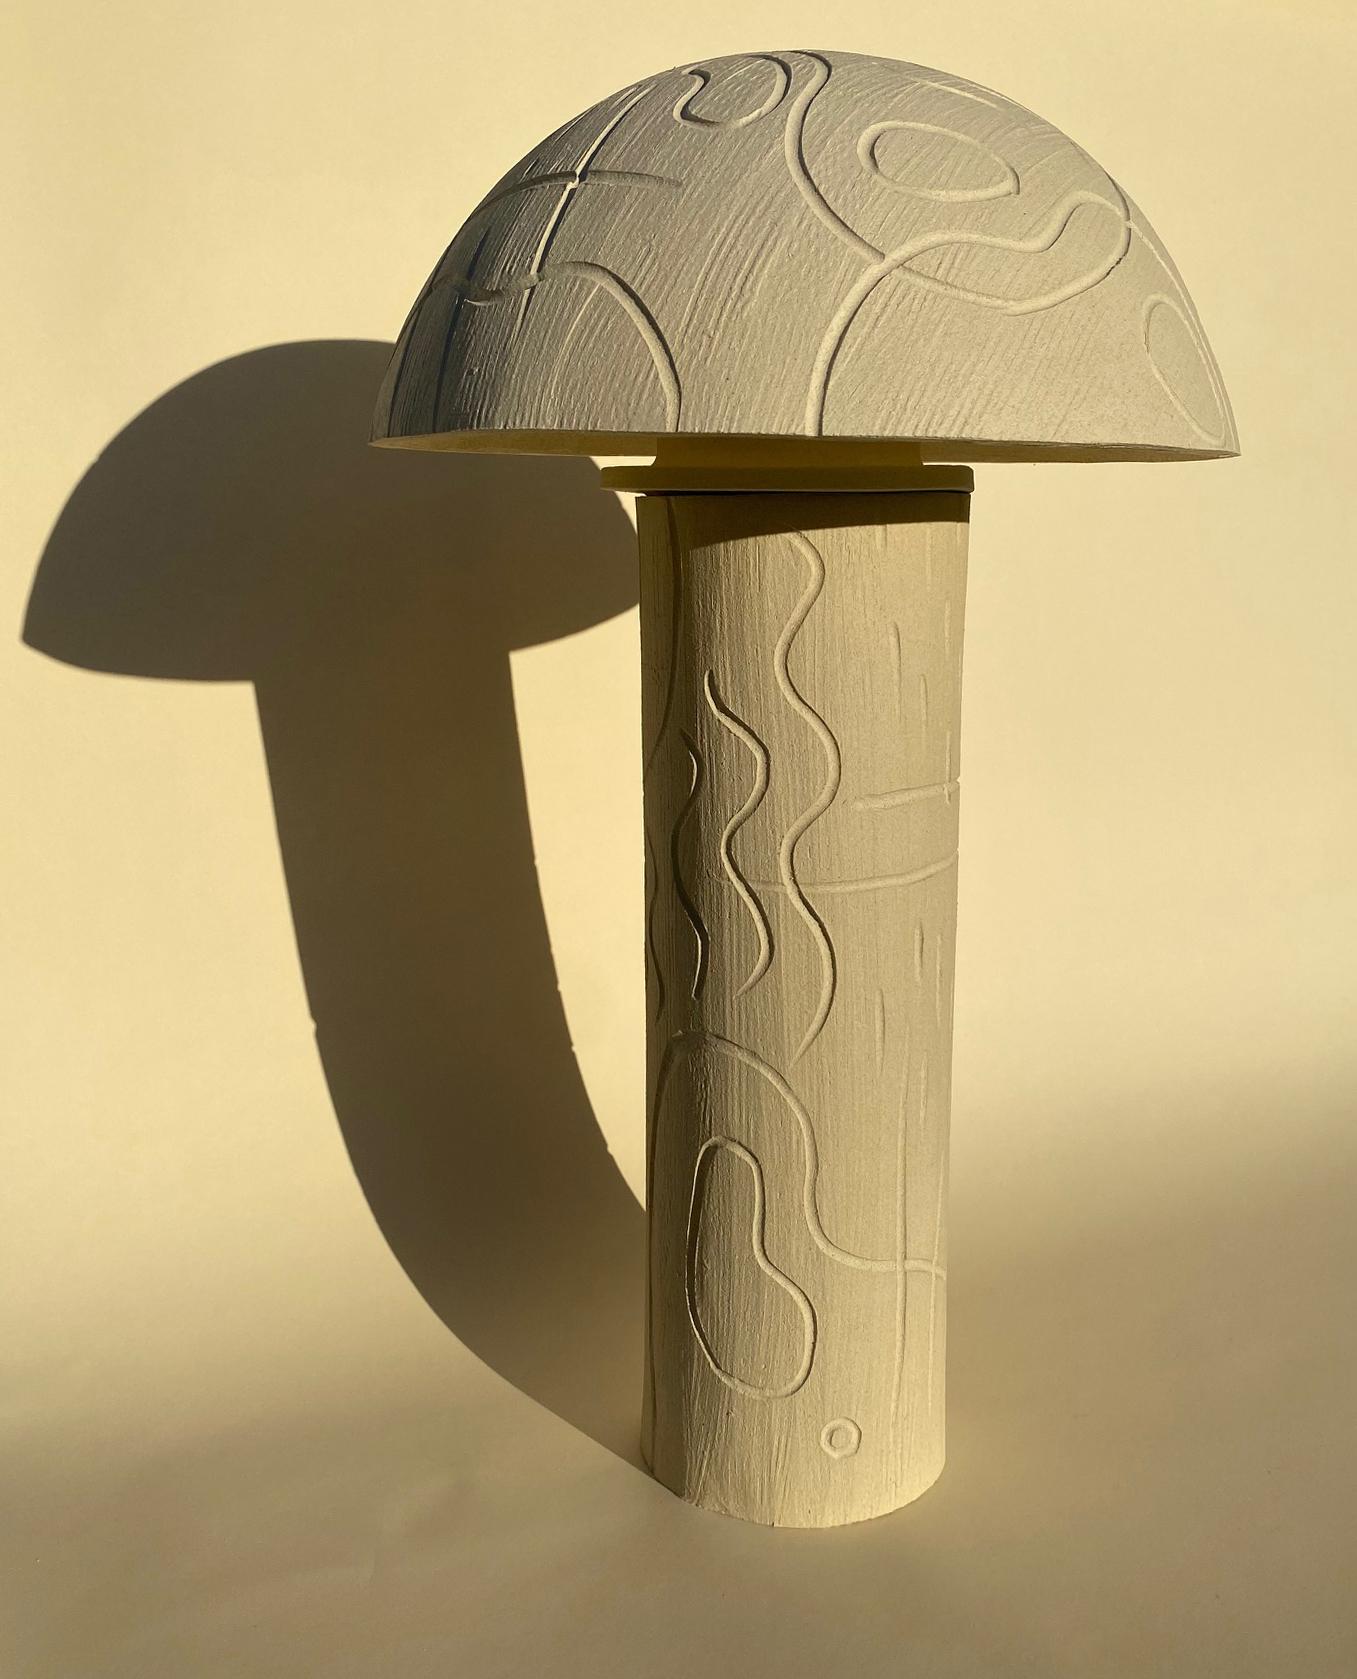 Tall lamp by Olivia Cognet
Materials: Ceramic.
Dimensions: D 42 x W 42 x H 71 cm

Since moving to Los Angeles in 2016, French artist and designer Olivia Cognet has focused on ceramics as the fertile medium through which she expresses her